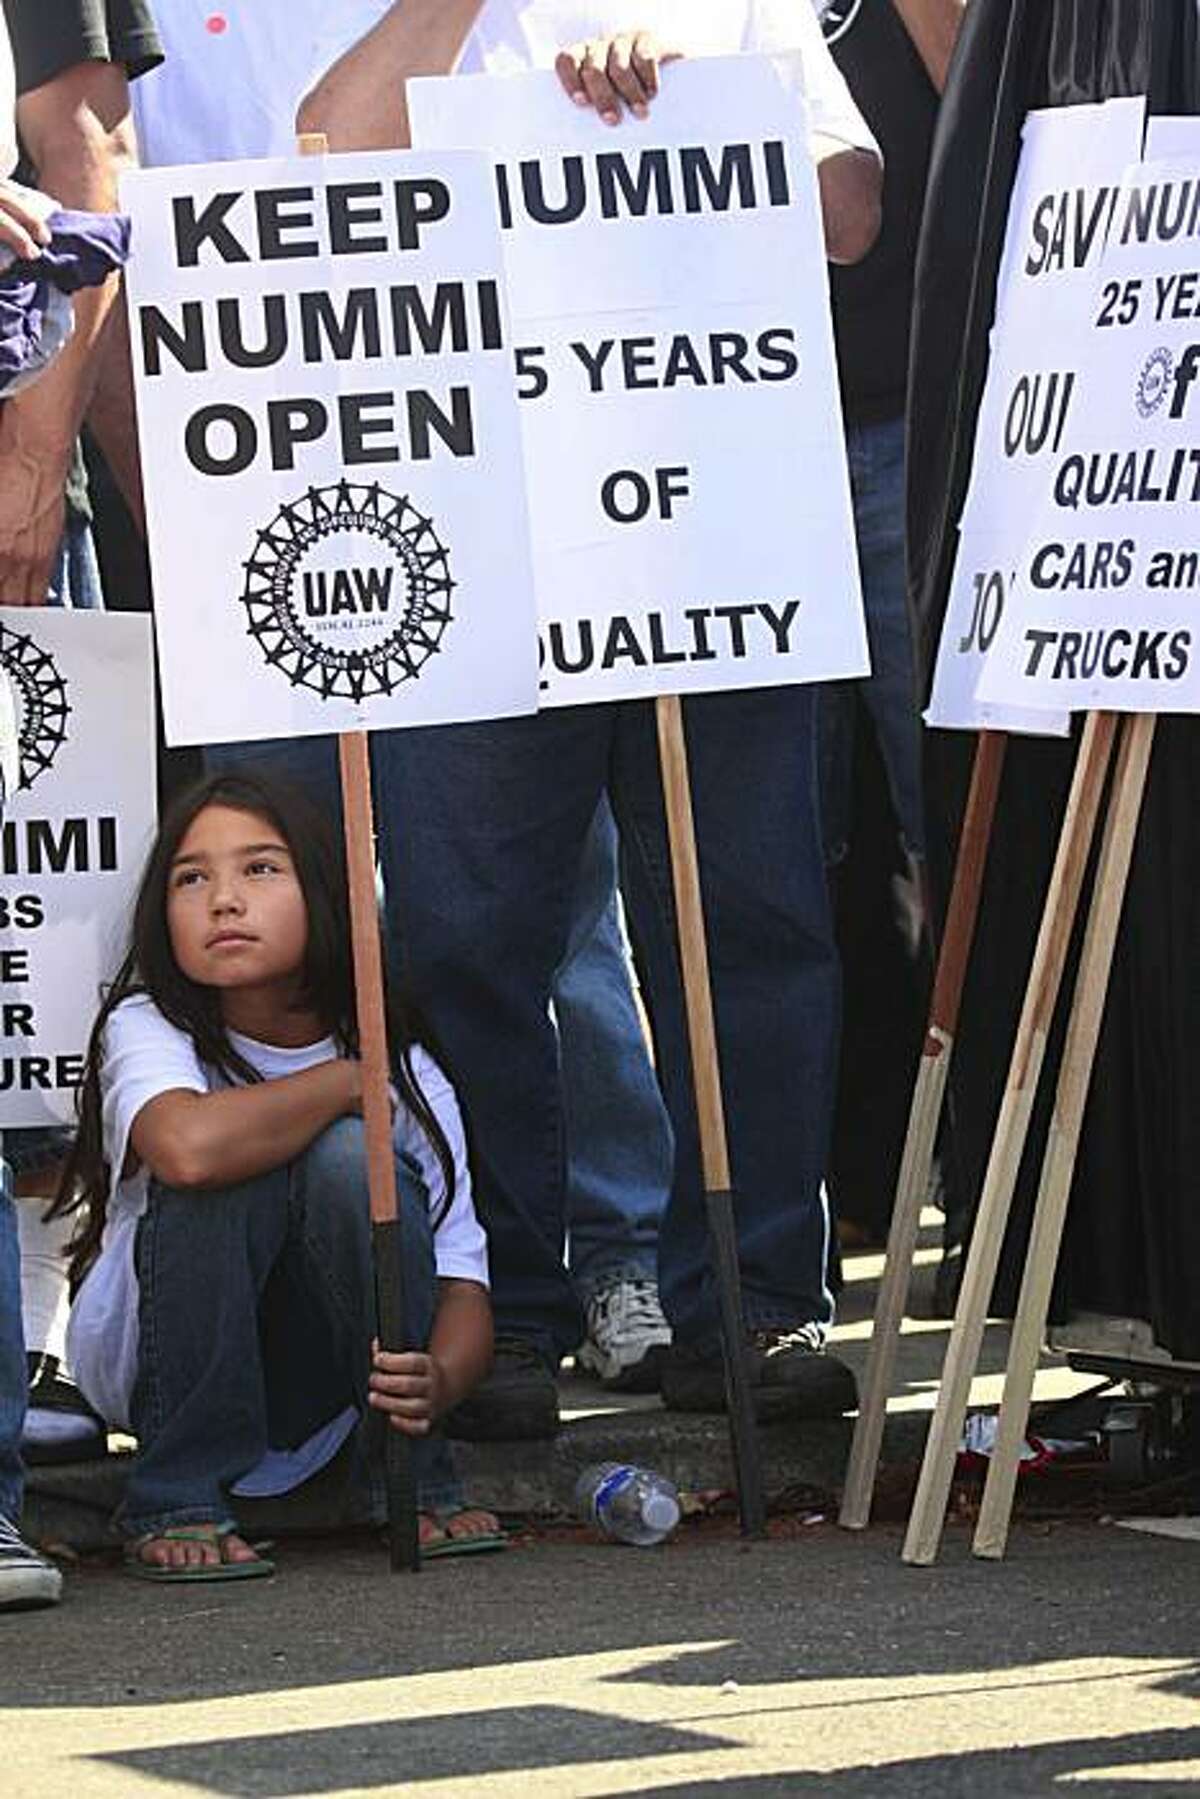 Linda Corona, 10 of Fremont, attended the Nummi rally with her father, Gerard Corona (not shown) to support workers in Fremont, Calif. on Thursday, August 20, 2009.